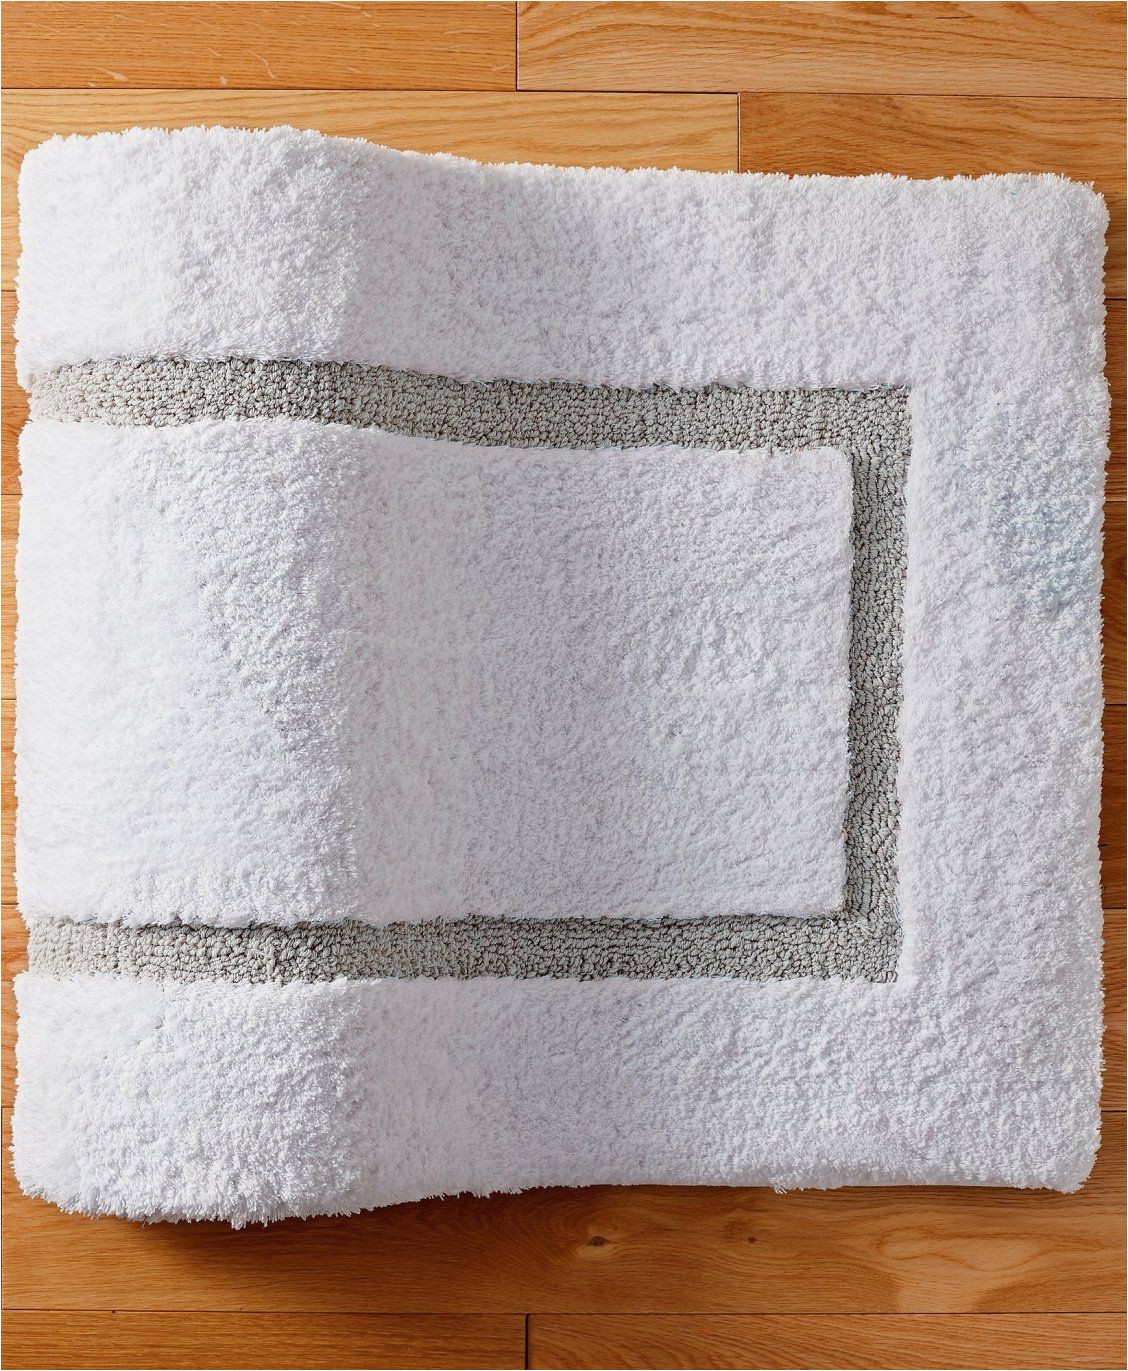 White Plush Bathroom Rugs We Developed A Bath Rug with A 12 Mm Memory Foam Insert and